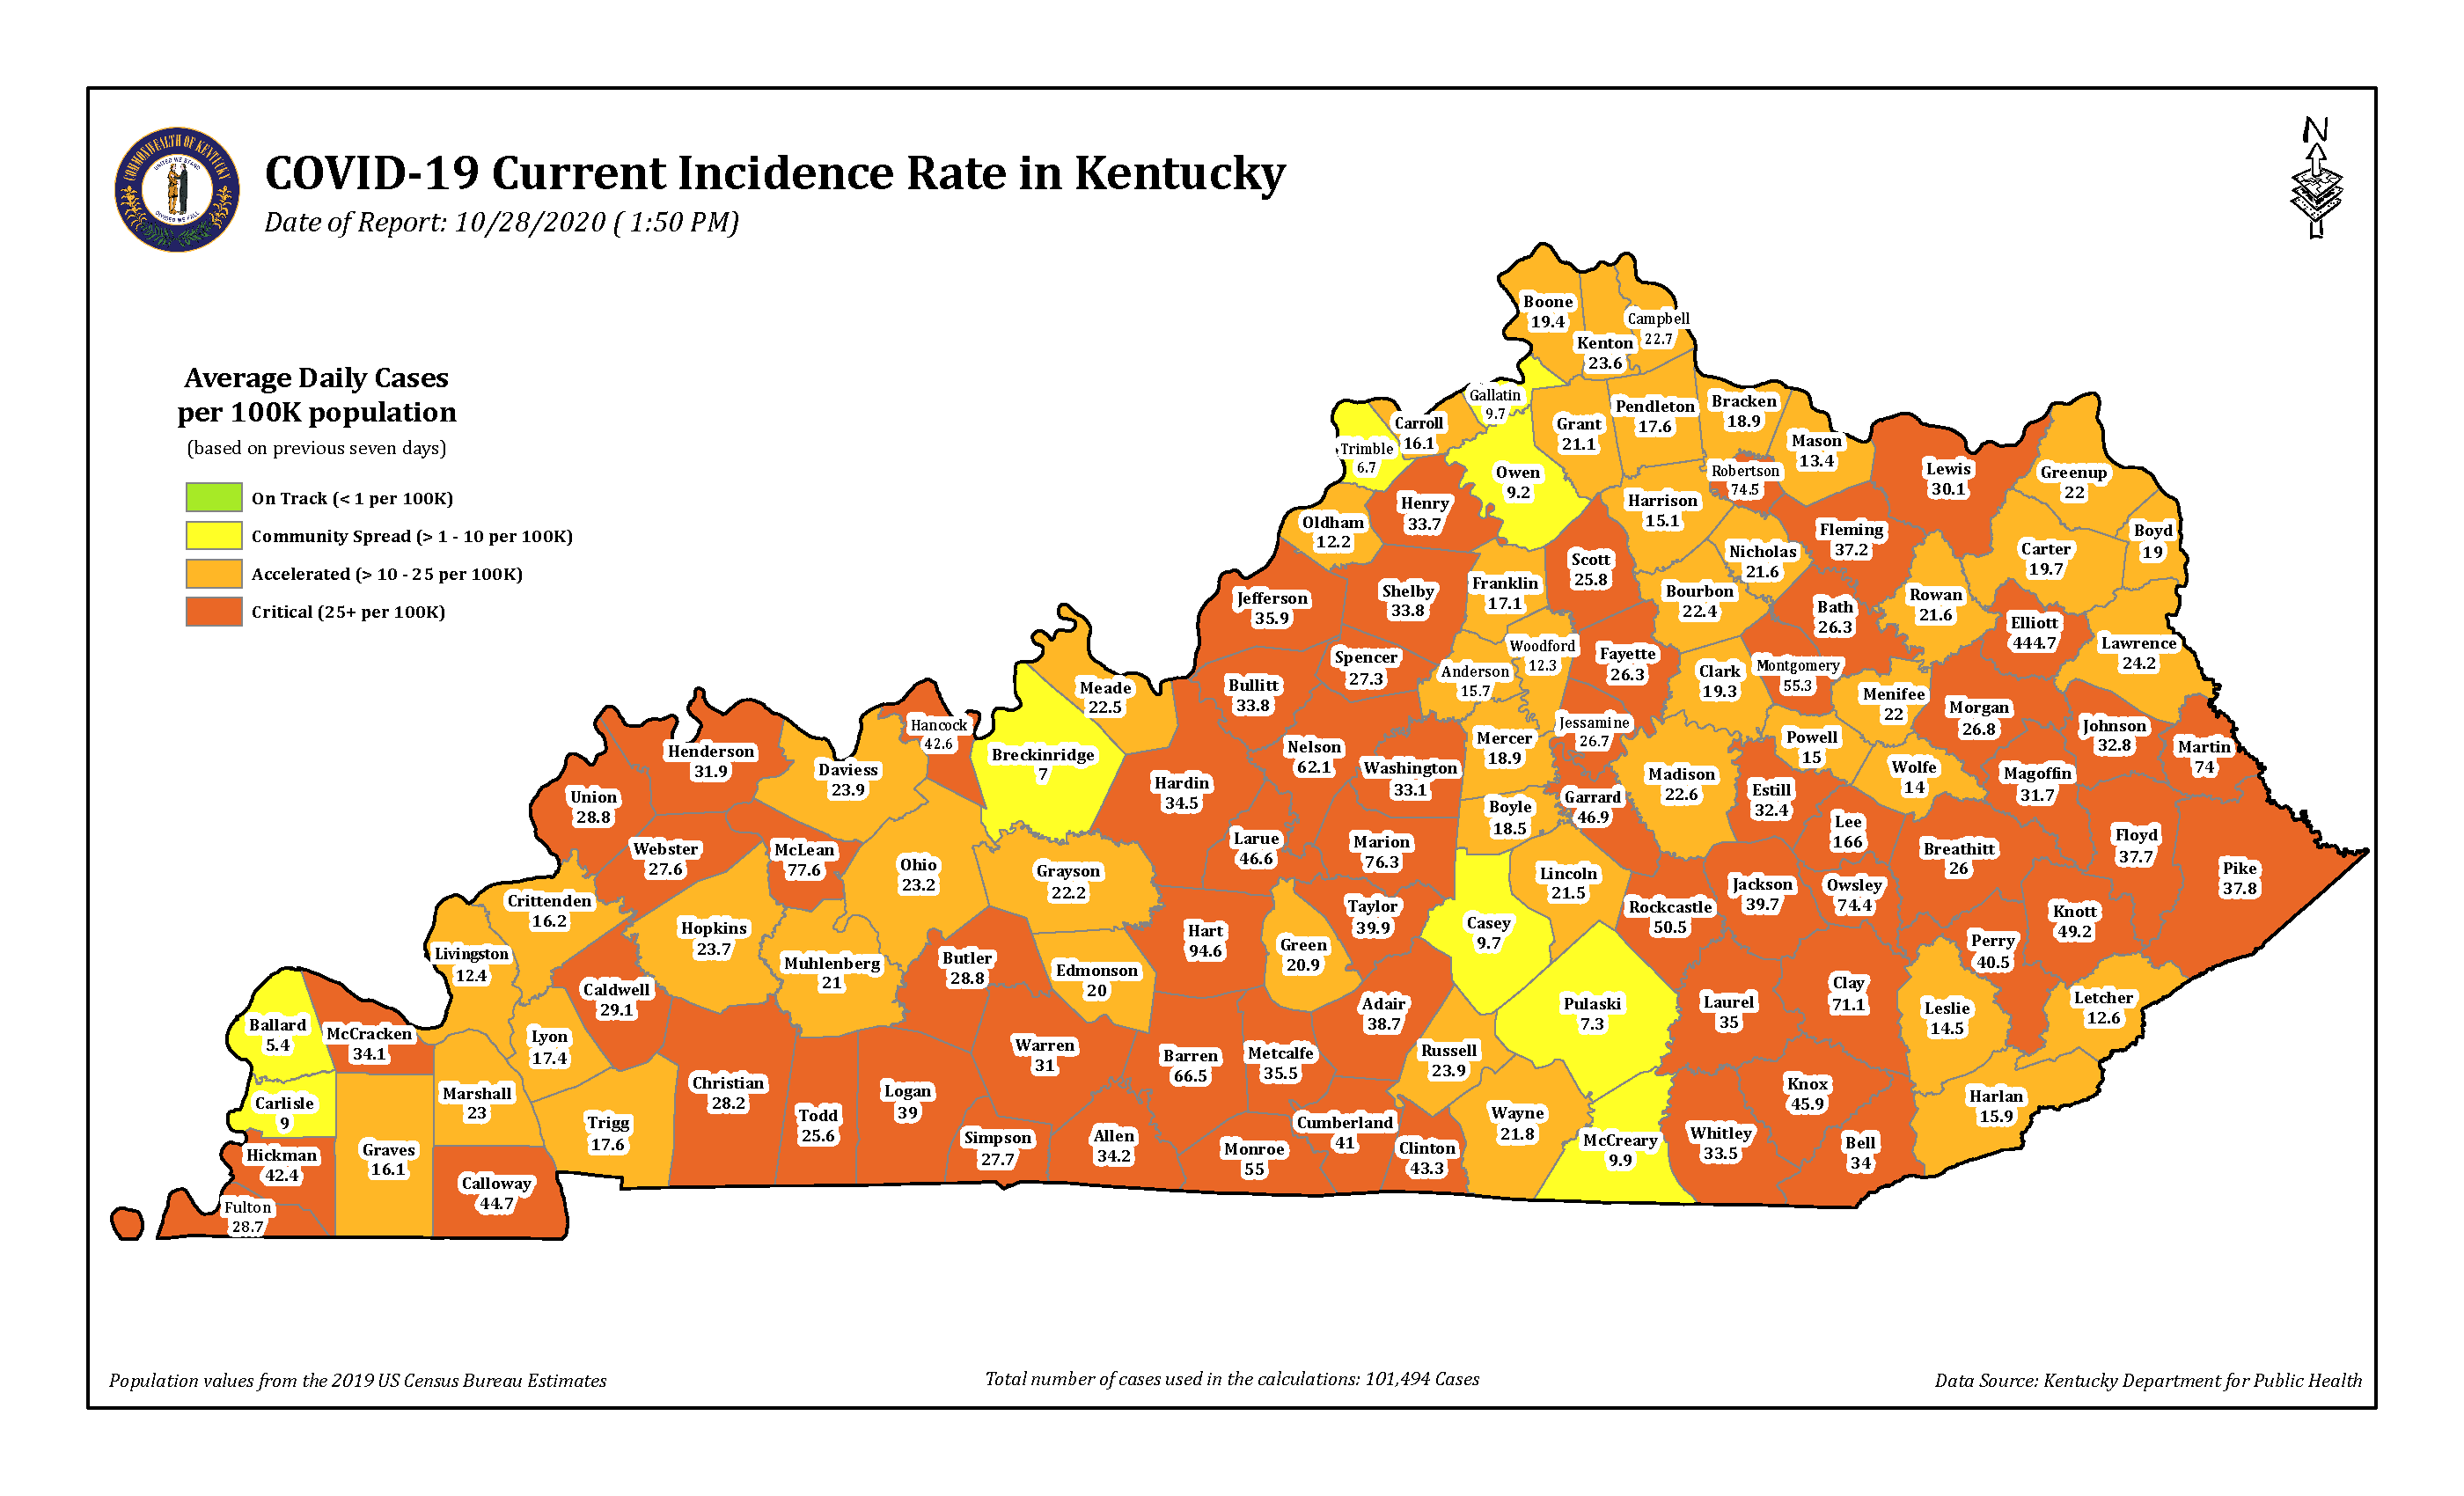 More Eastern Ky. counties turn red in latest update